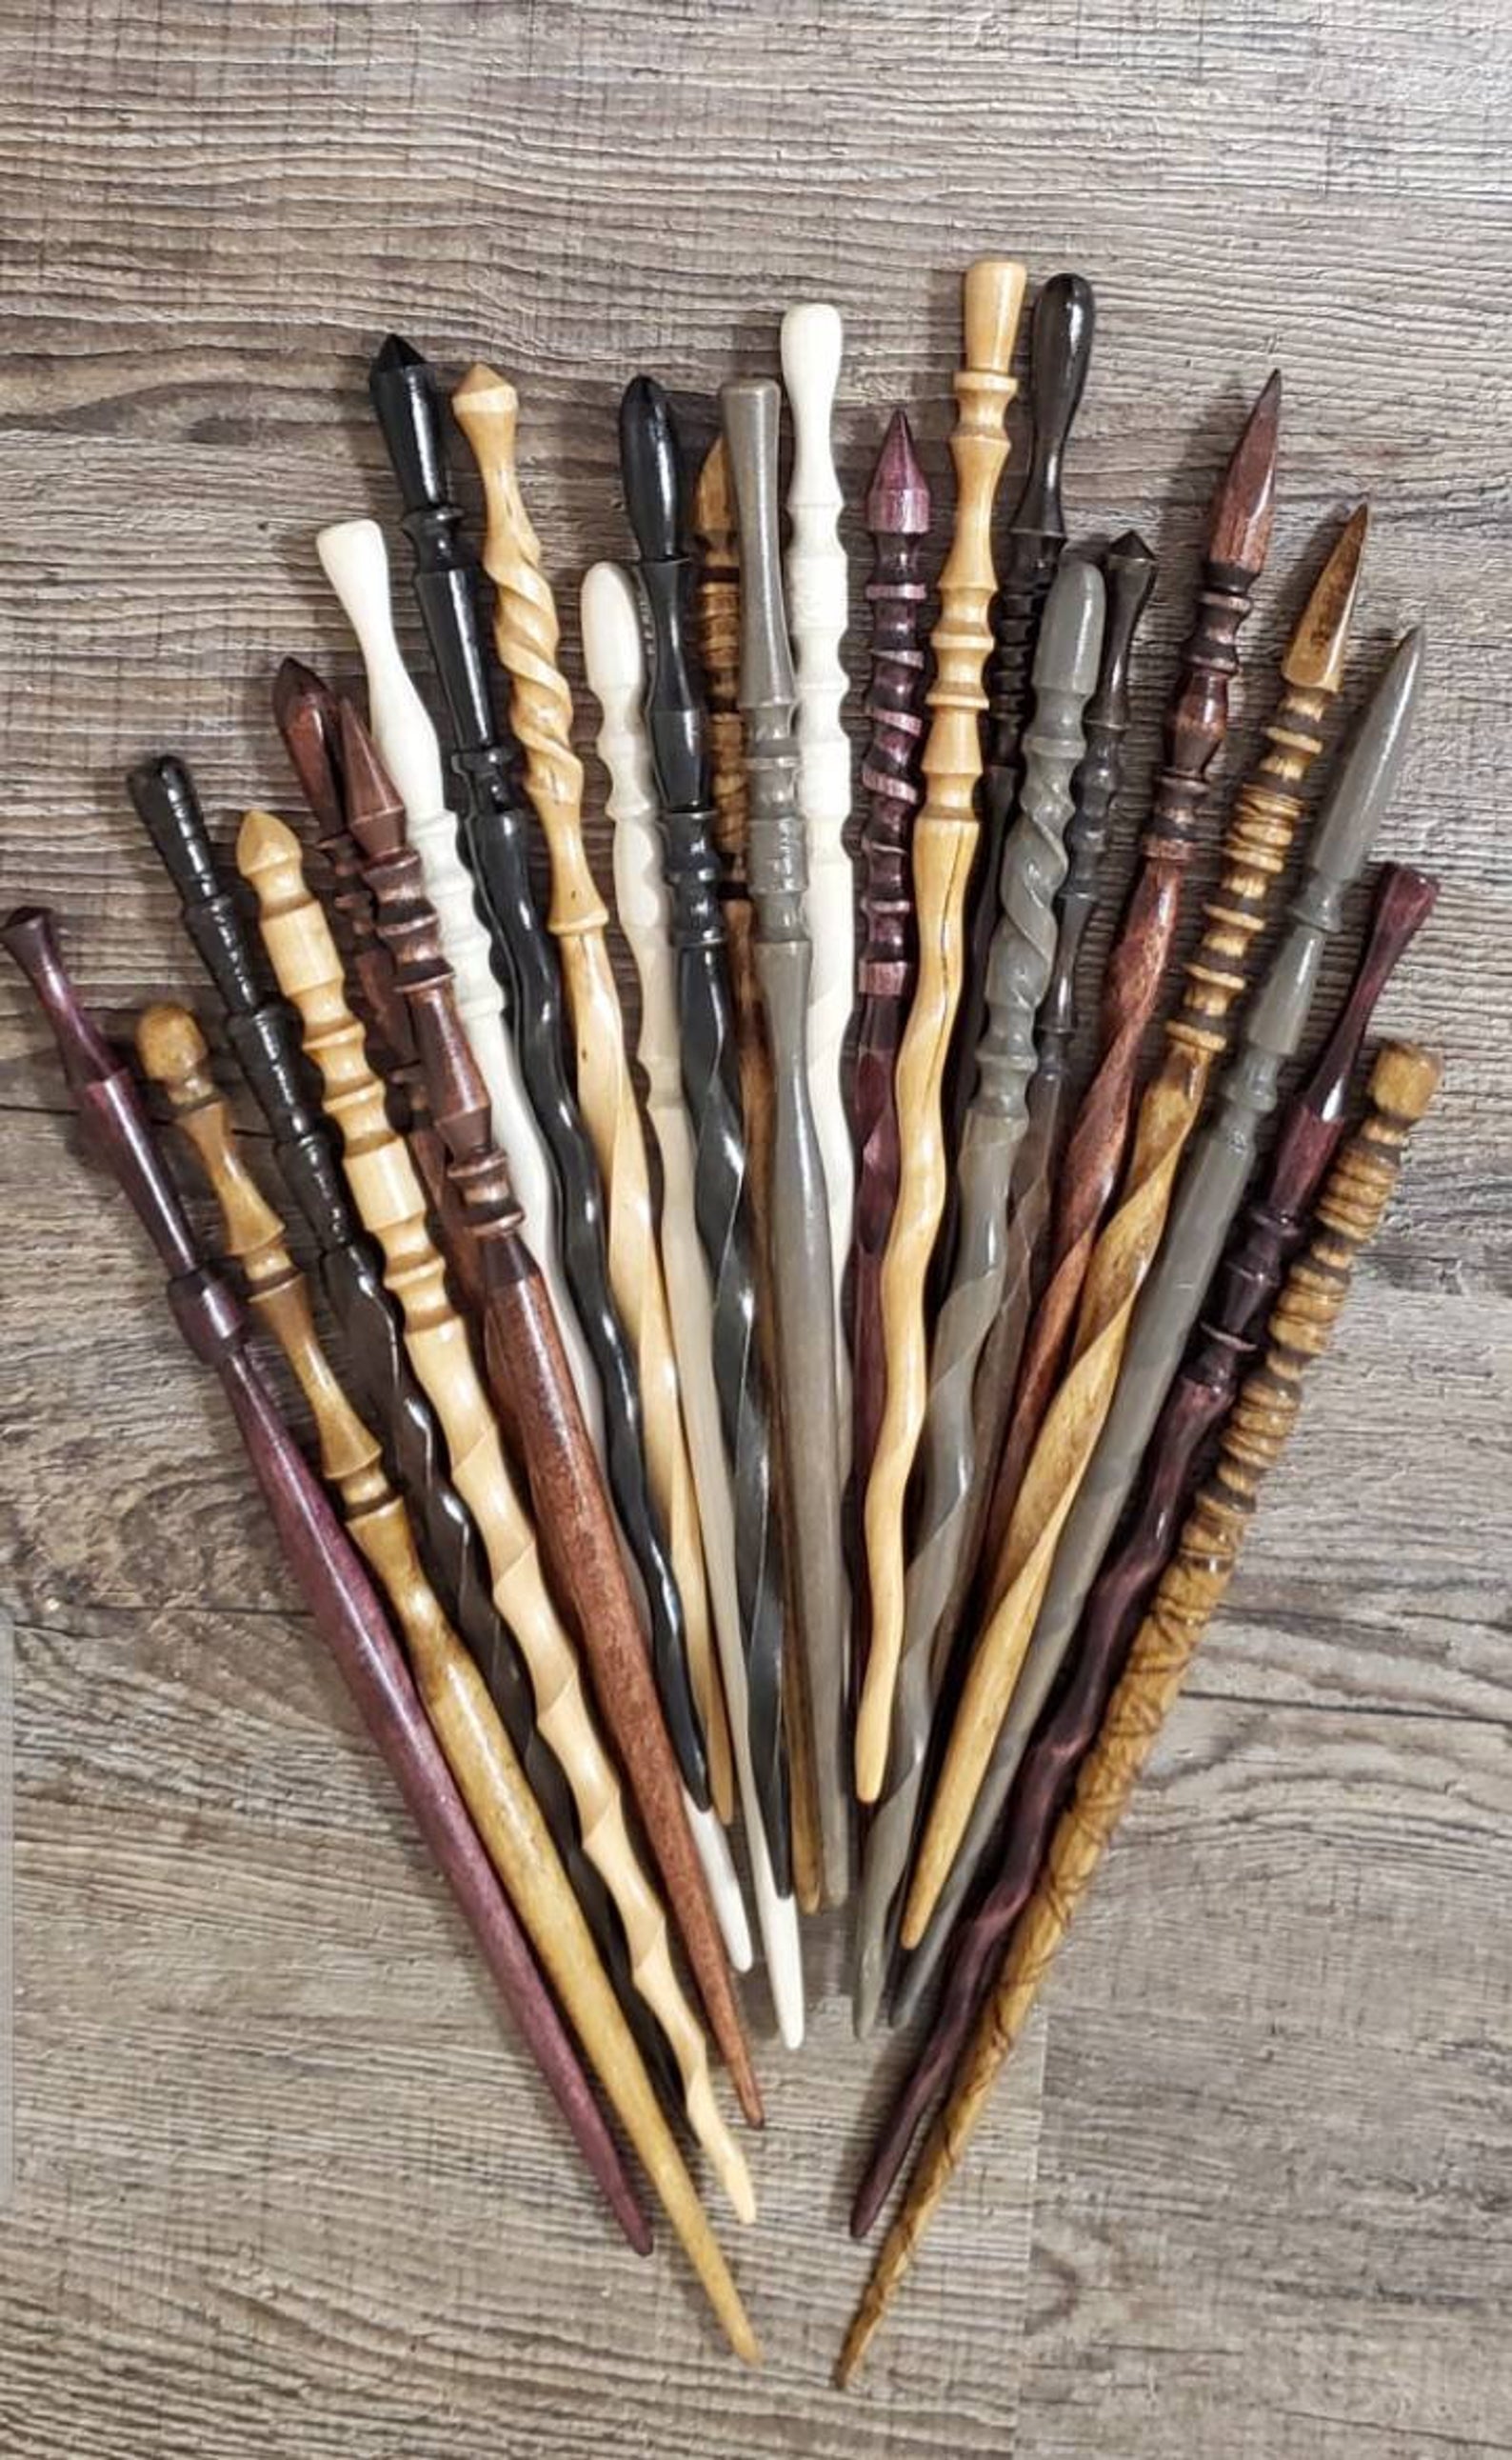 wands singles collection rare